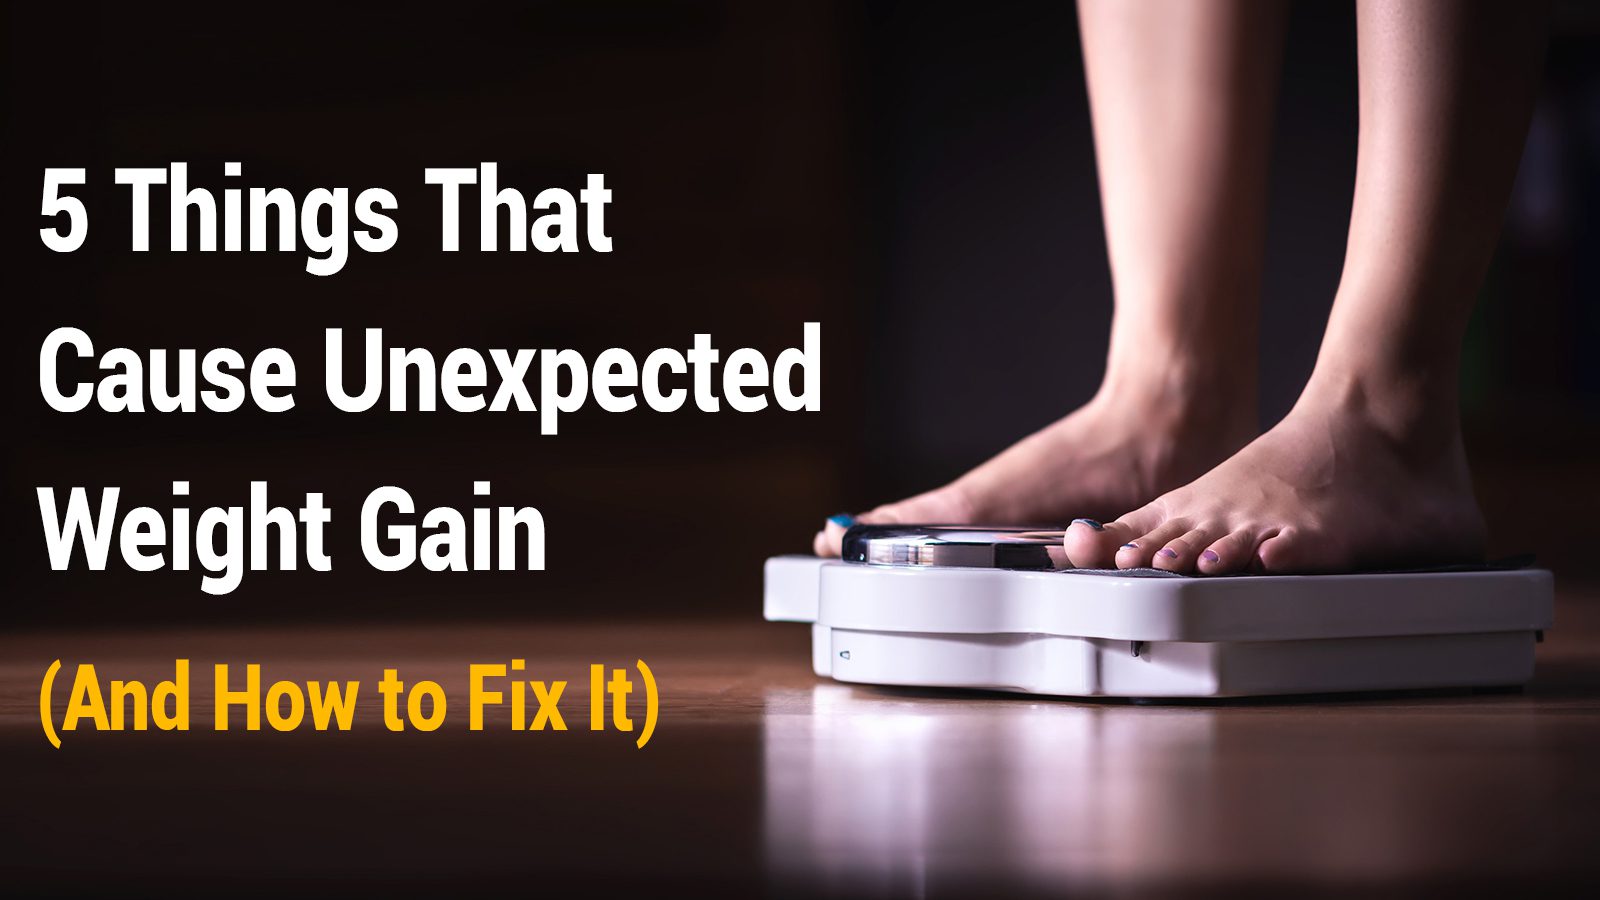 5 Things That Cause Unexpected Weight Gain (And How to Fix It)